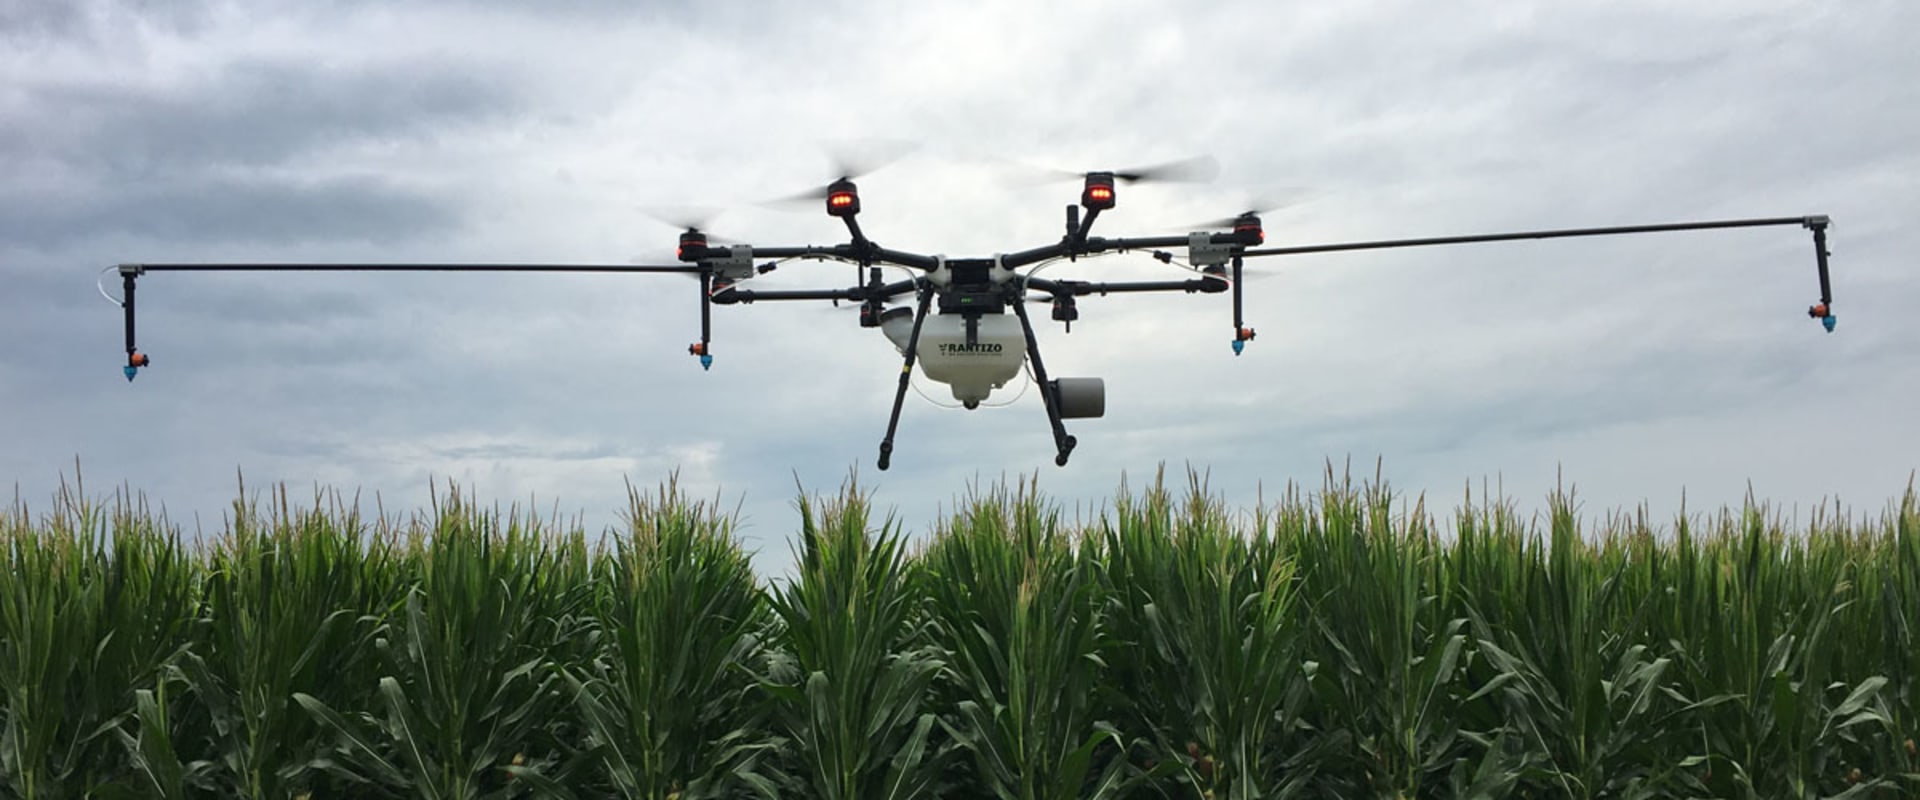 The Benefits of UAS in Agriculture